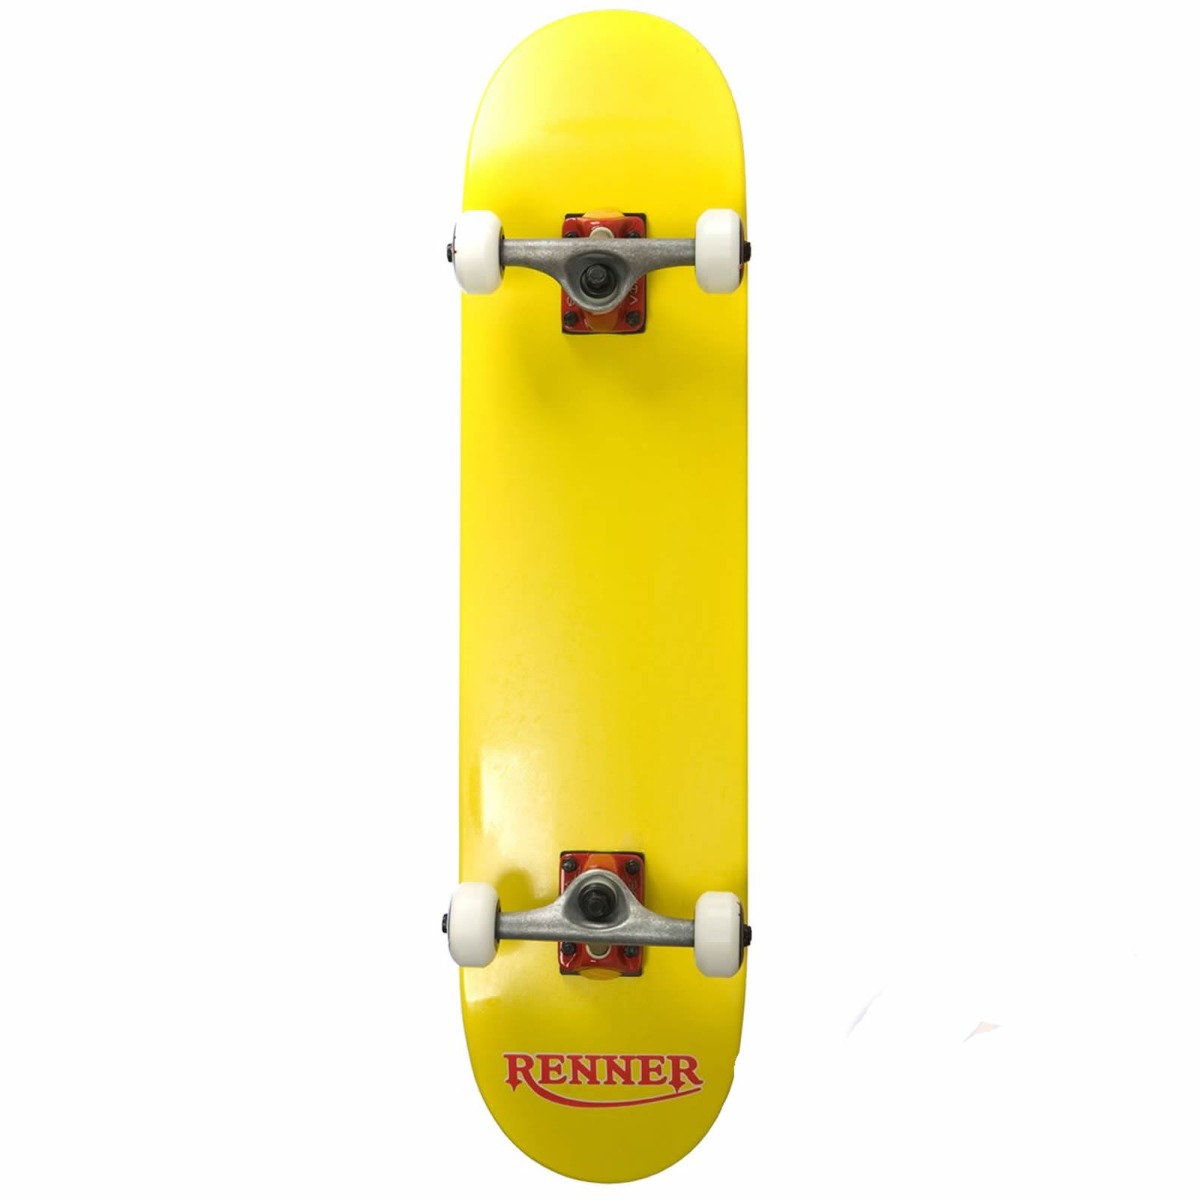 An image of Renner Pro Series 7.75" Complete Skateboard - Yellow